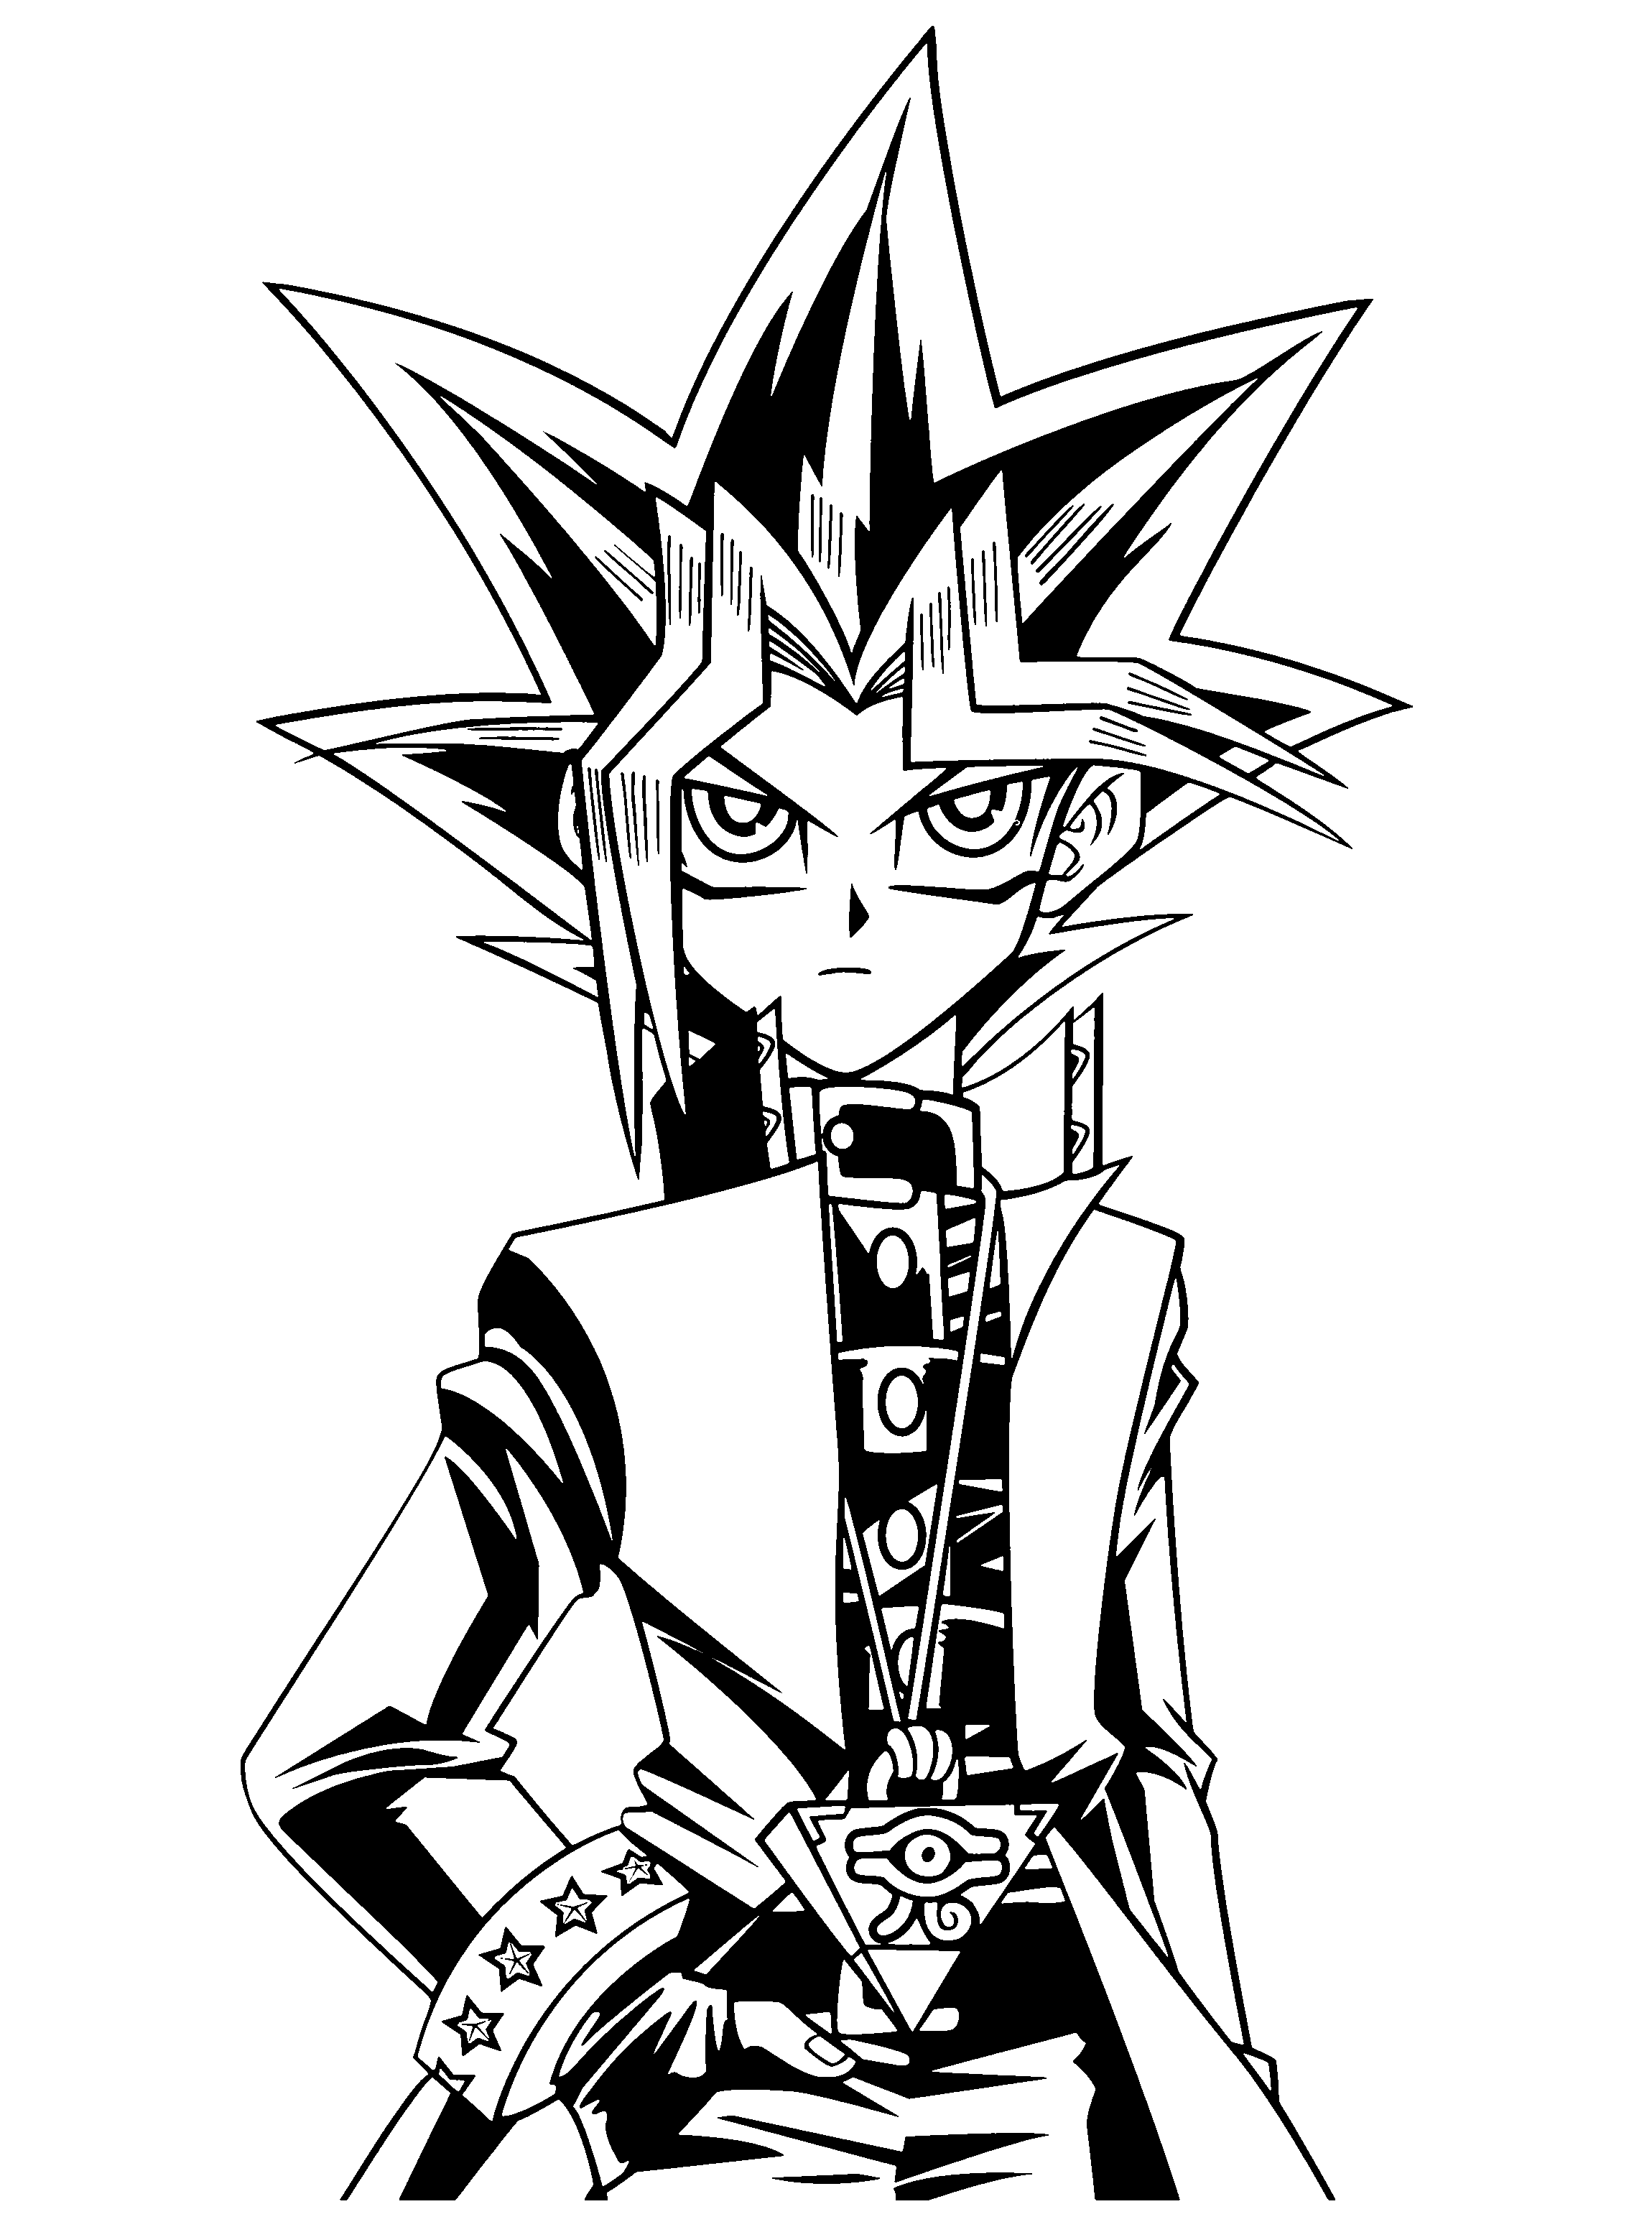 Coloring Page Yu Gi Oh Coloring Pages 56 Cartoon Coloring Pages Coloring Pages Yugioh